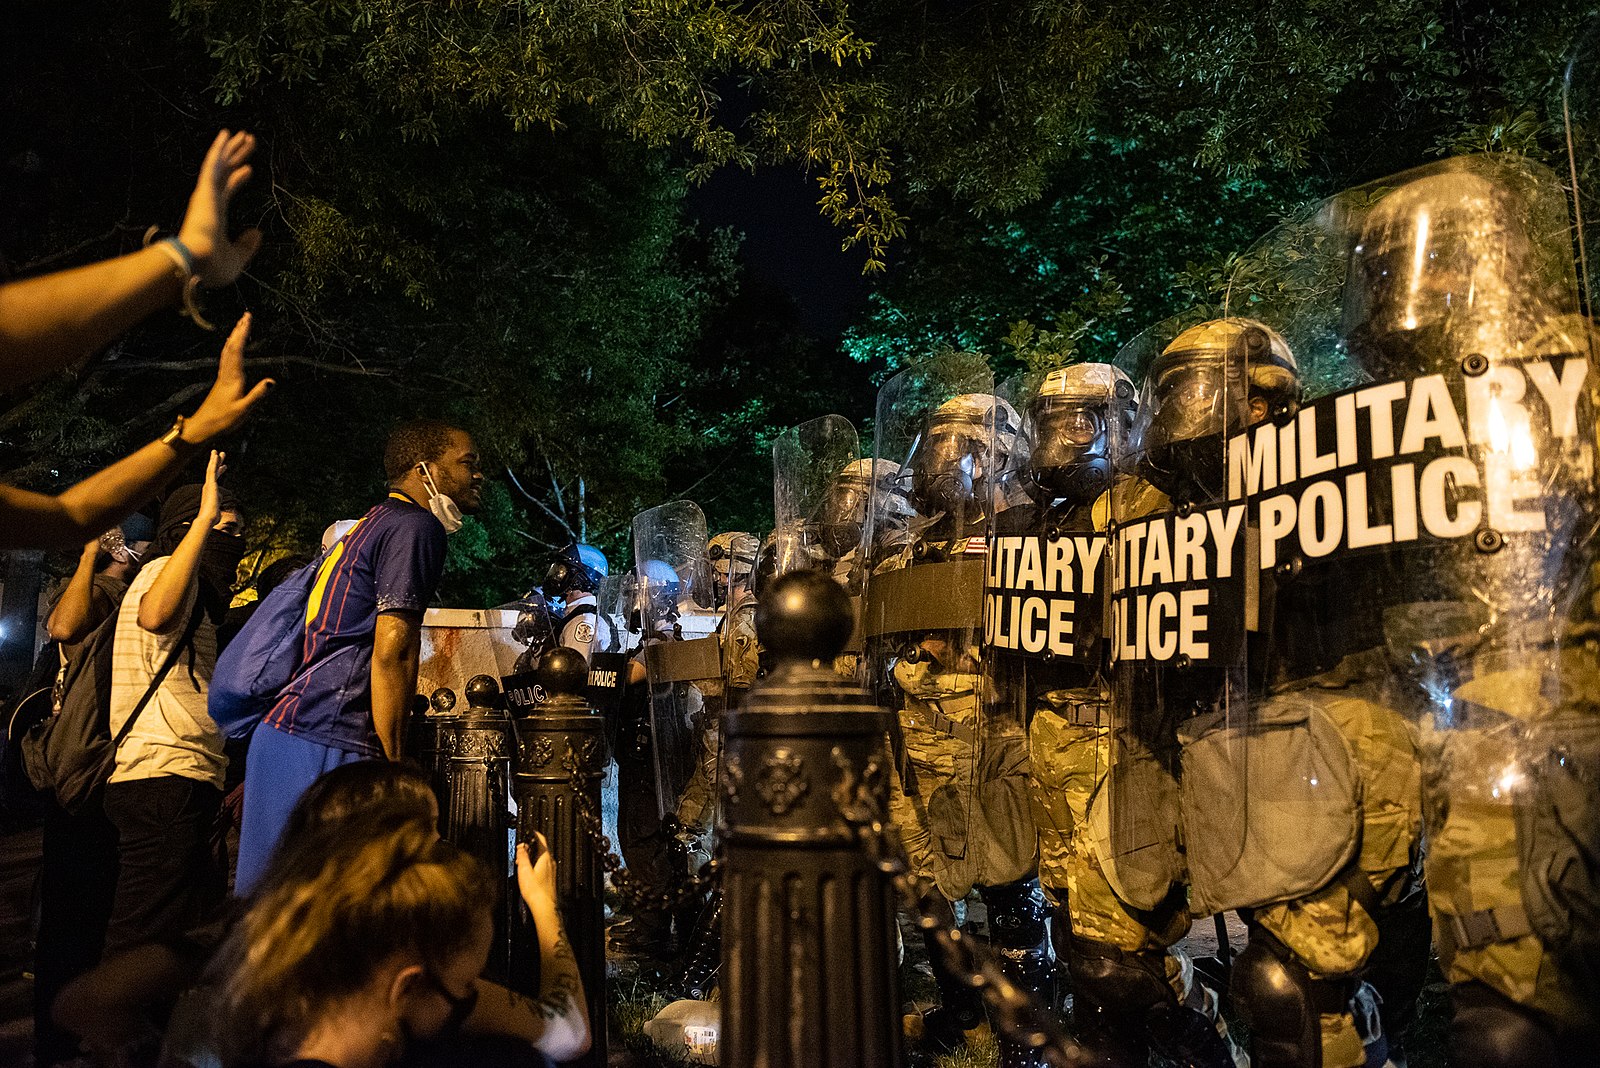 George Floyd protestors clash with the police outside of the White House.